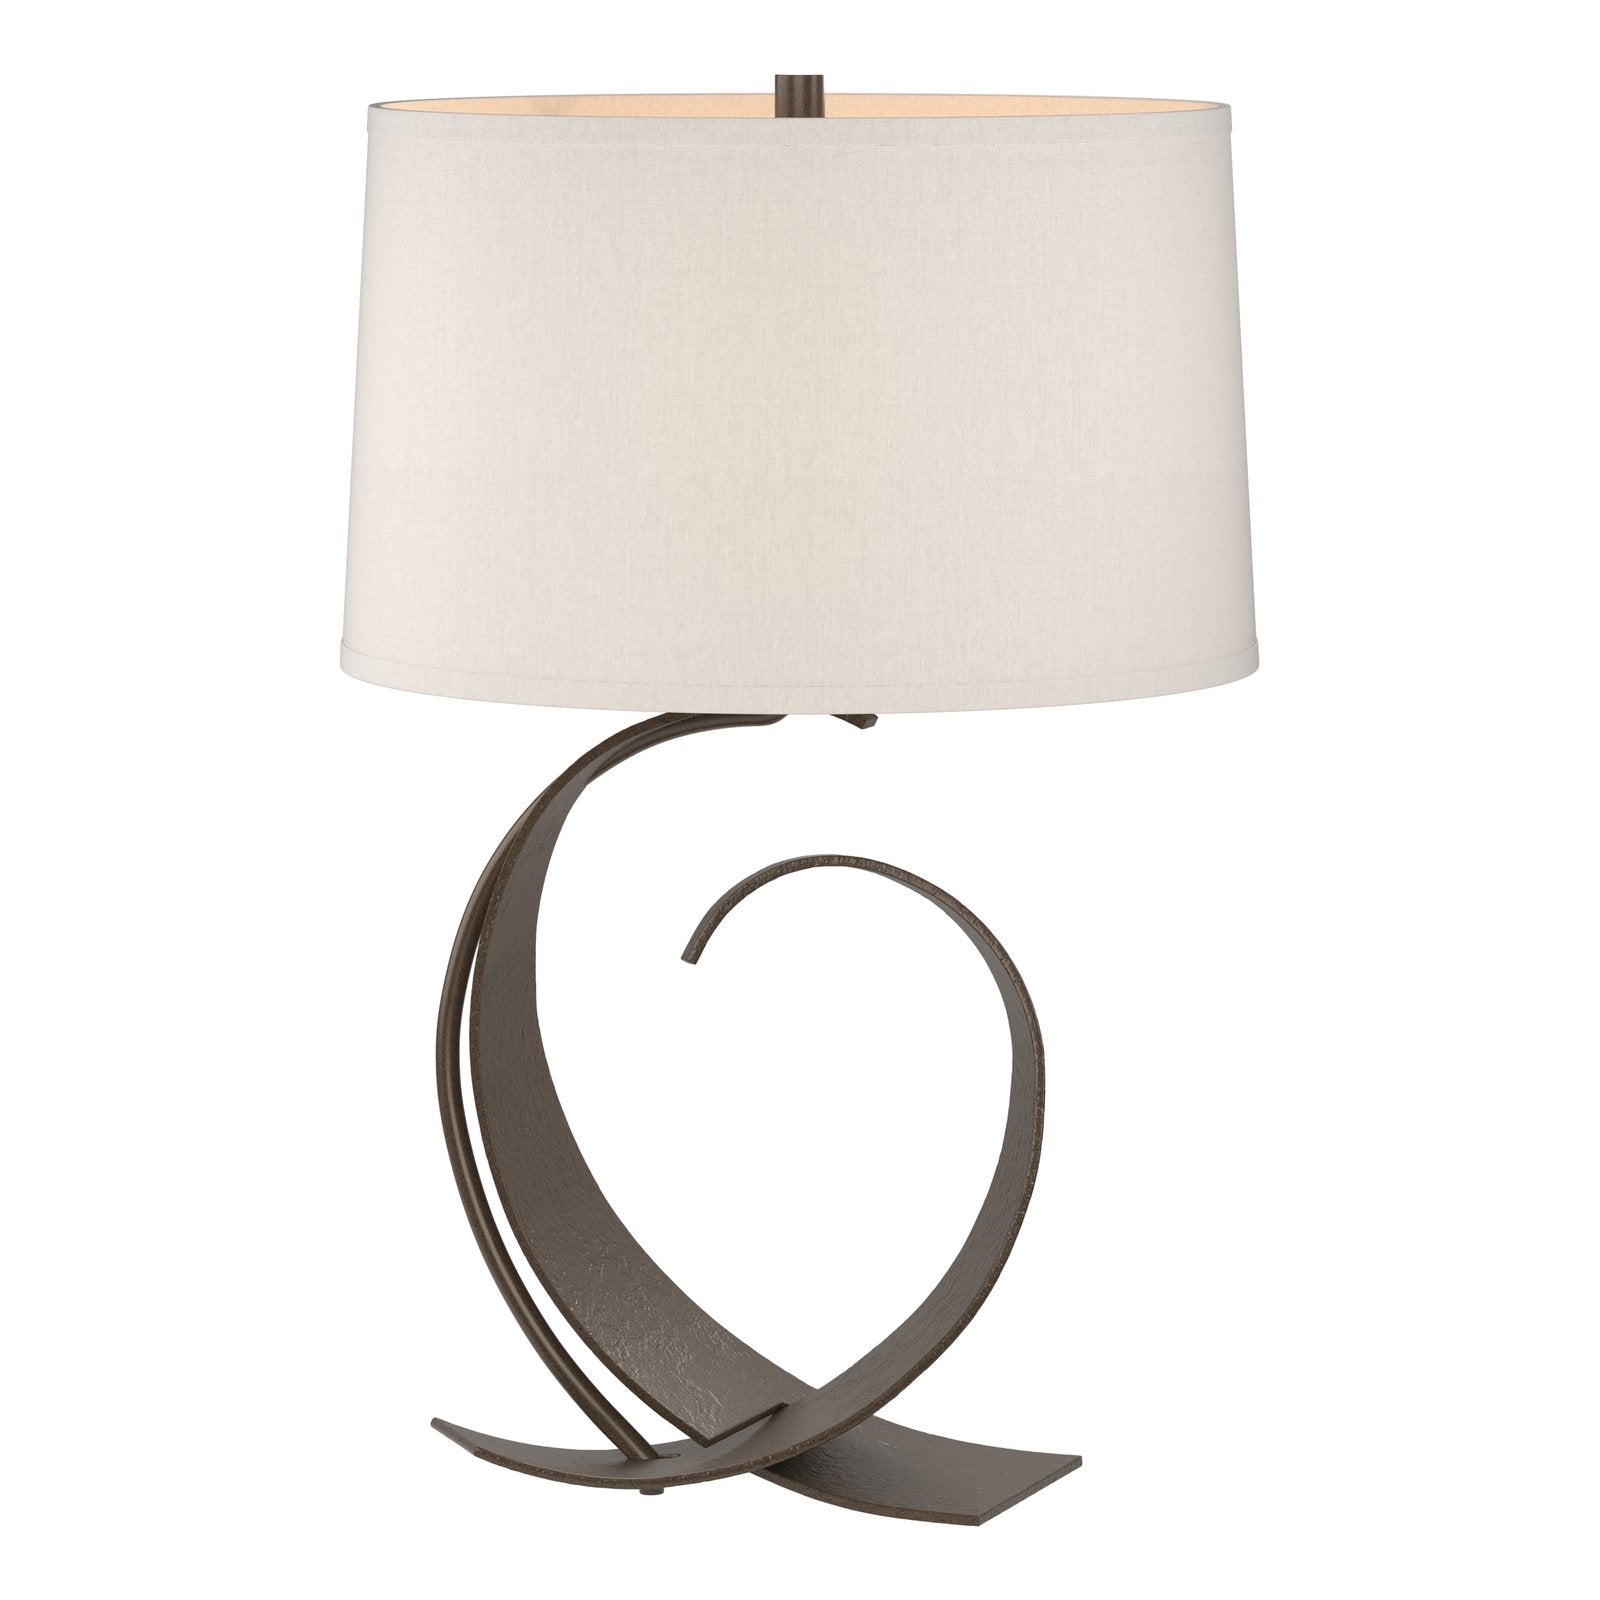 Fullered Impressions Table Lamp Lamp Hubbardton Forge Bronze 14x22.1 Flax